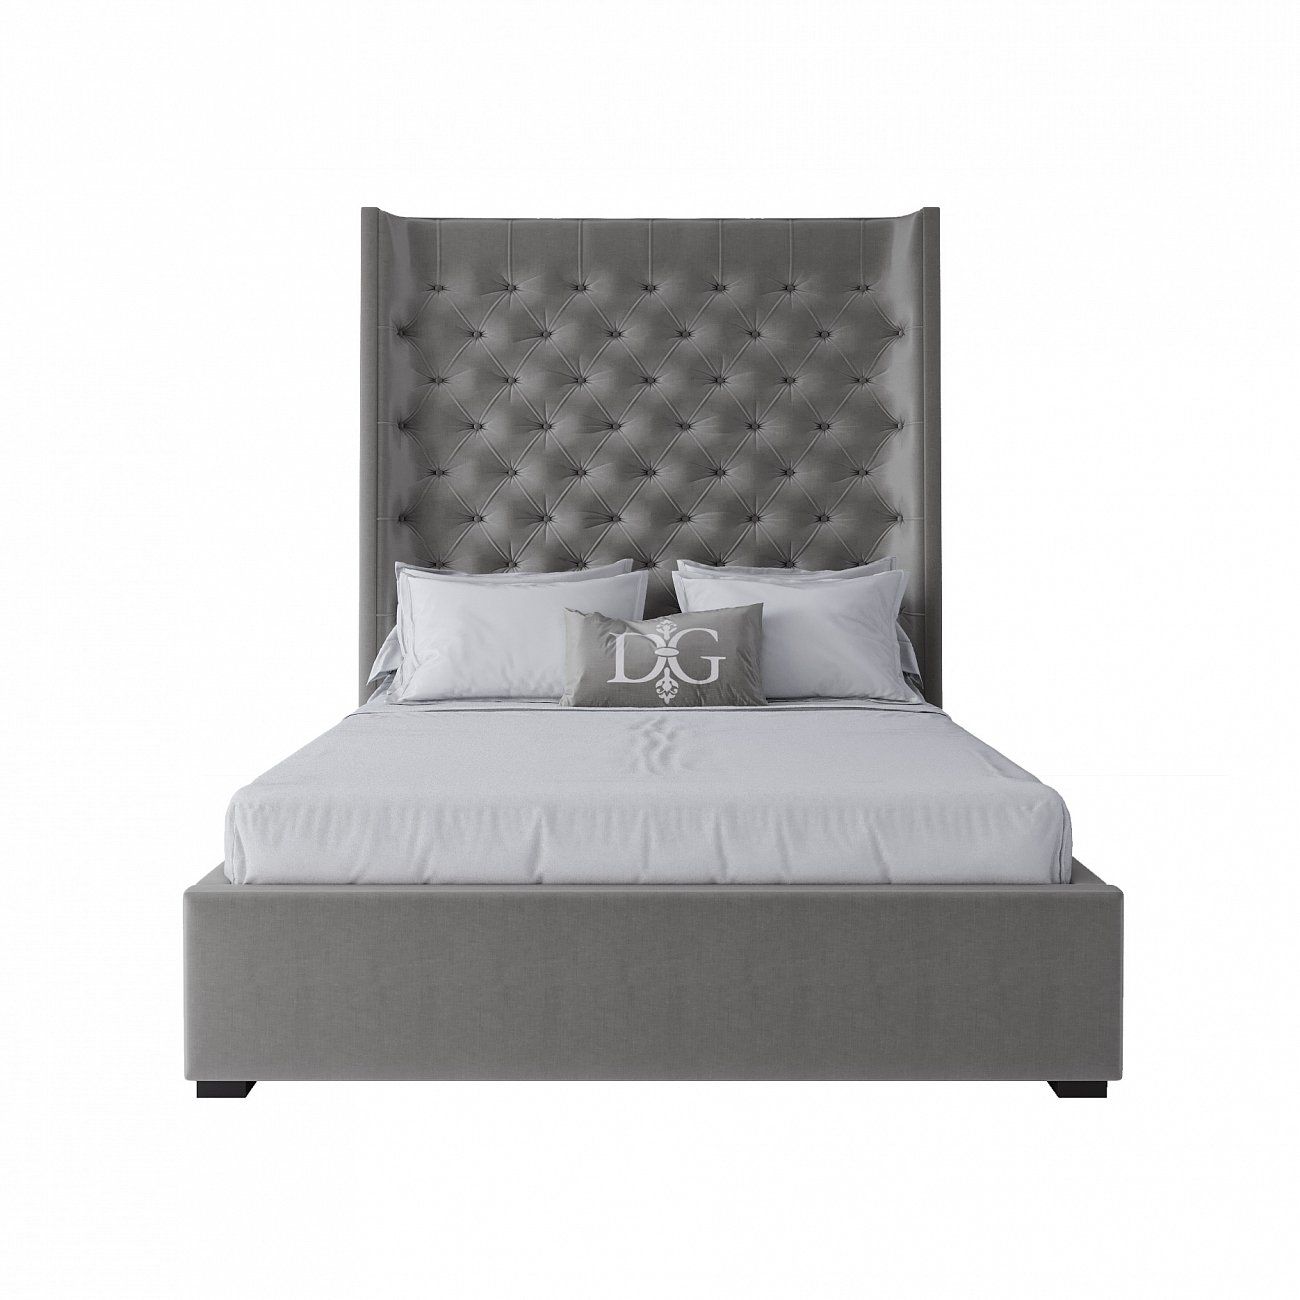 Teenage bed with carriage screed 140x200 cm grey Jackie King